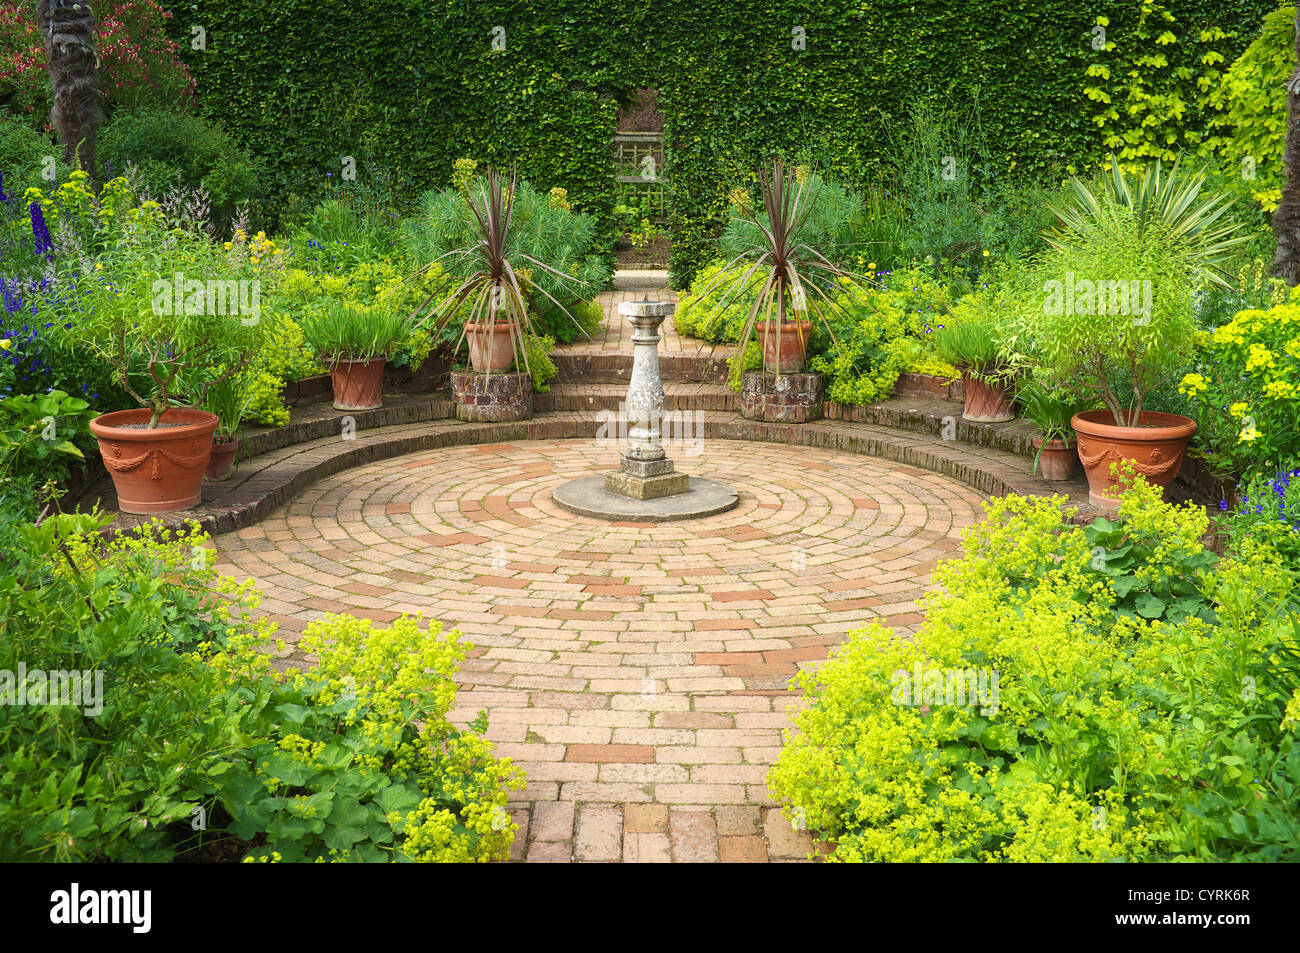 Paved brick garden path leading to Sundial in circular paved area, England UK Stock Photo